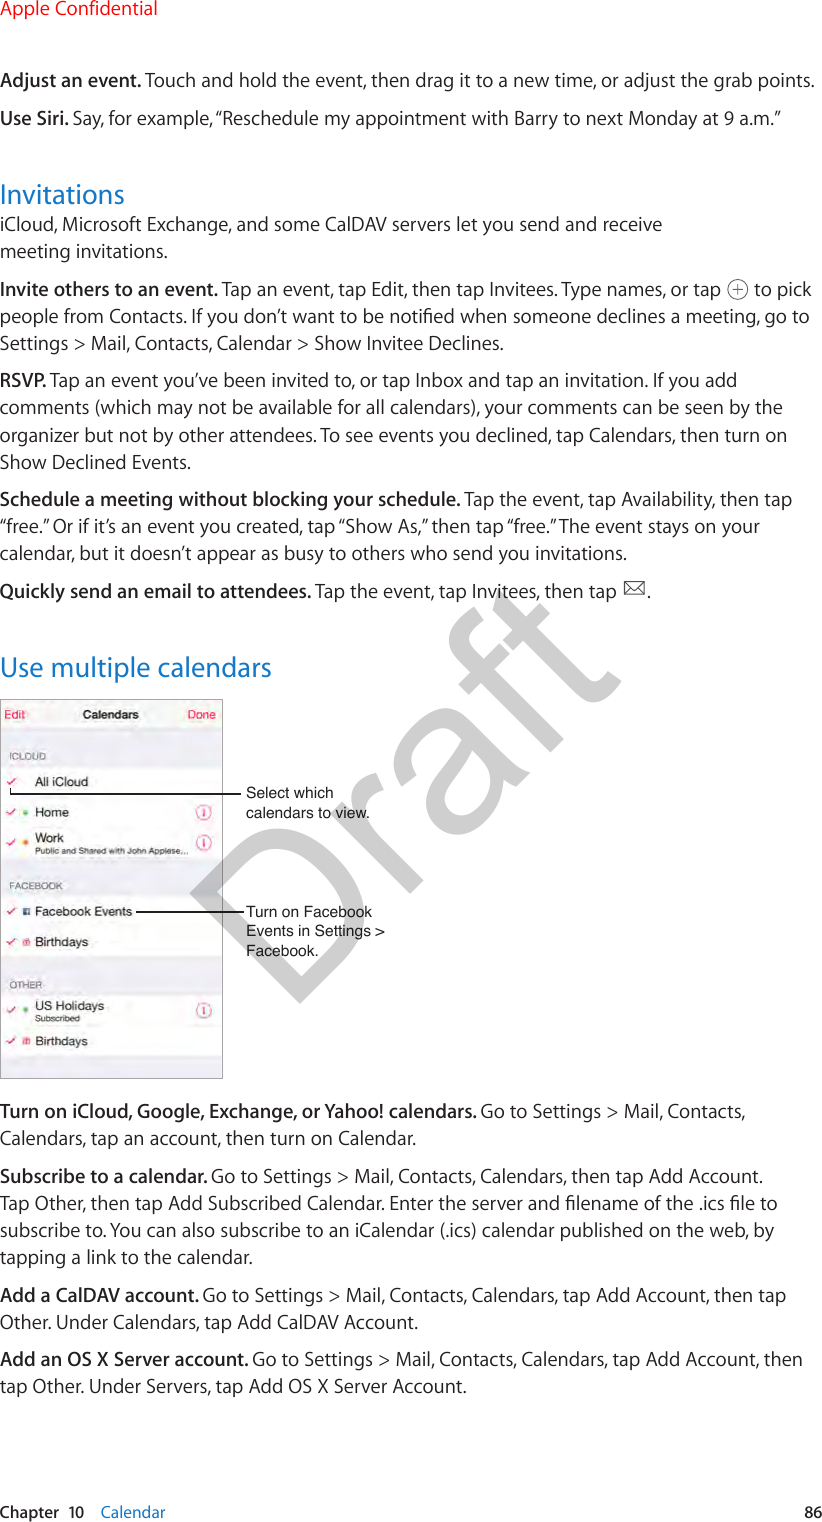 Chapter  10    Calendar  86Adjust an event. Touch and hold the event, then drag it to a new time, or adjust the grab points.Use Siri. Say, for example, “Reschedule my appointment with Barry to next Monday at 9 a.m.”InvitationsiCloud, Microsoft Exchange, and some CalDAV servers let you send and receive meeting invitations.Invite others to an event. Tap an event, tap Edit, then tap Invitees. Type names, or tap   to pick people from Contacts. If you don’t want to be notied when someone declines a meeting, go to Settings &gt; Mail, Contacts, Calendar &gt; Show Invitee Declines.RSVP. Tap an event you’ve been invited to, or tap Inbox and tap an invitation. If you add comments (which may not be available for all calendars), your comments can be seen by the organizer but not by other attendees. To see events you declined, tap Calendars, then turn on Show Declined Events.Schedule a meeting without blocking your schedule. Tap the event, tap Availability, then tap “free.” Or if it’s an event you created, tap “Show As,” then tap “free.” The event stays on your calendar, but it doesn’t appear as busy to others who send you invitations.Quickly send an email to attendees. Tap the event, tap Invitees, then tap  .Use multiple calendarsTurn on Facebook Events in Settings &gt; Facebook.Turn on Facebook Events in Settings &gt; Facebook.Select which calendars to view.Select which calendars to view.Turn on iCloud, Google, Exchange, or Yahoo! calendars. Go to Settings &gt; Mail, Contacts, Calendars, tap an account, then turn on Calendar.Subscribe to a calendar. Go to Settings &gt; Mail, Contacts, Calendars, then tap Add Account. Tap Other, then tap Add Subscribed Calendar. Enter the server and lename of the .ics le to subscribe to. You can also subscribe to an iCalendar (.ics) calendar published on the web, by tapping a link to the calendar.Add a CalDAV account. Go to Settings &gt; Mail, Contacts, Calendars, tap Add Account, then tap Other. Under Calendars, tap Add CalDAV Account.Add an OS X Server account. Go to Settings &gt; Mail, Contacts, Calendars, tap Add Account, then tap Other. Under Servers, tap Add OS X Server Account.Apple ConfidentialDraft